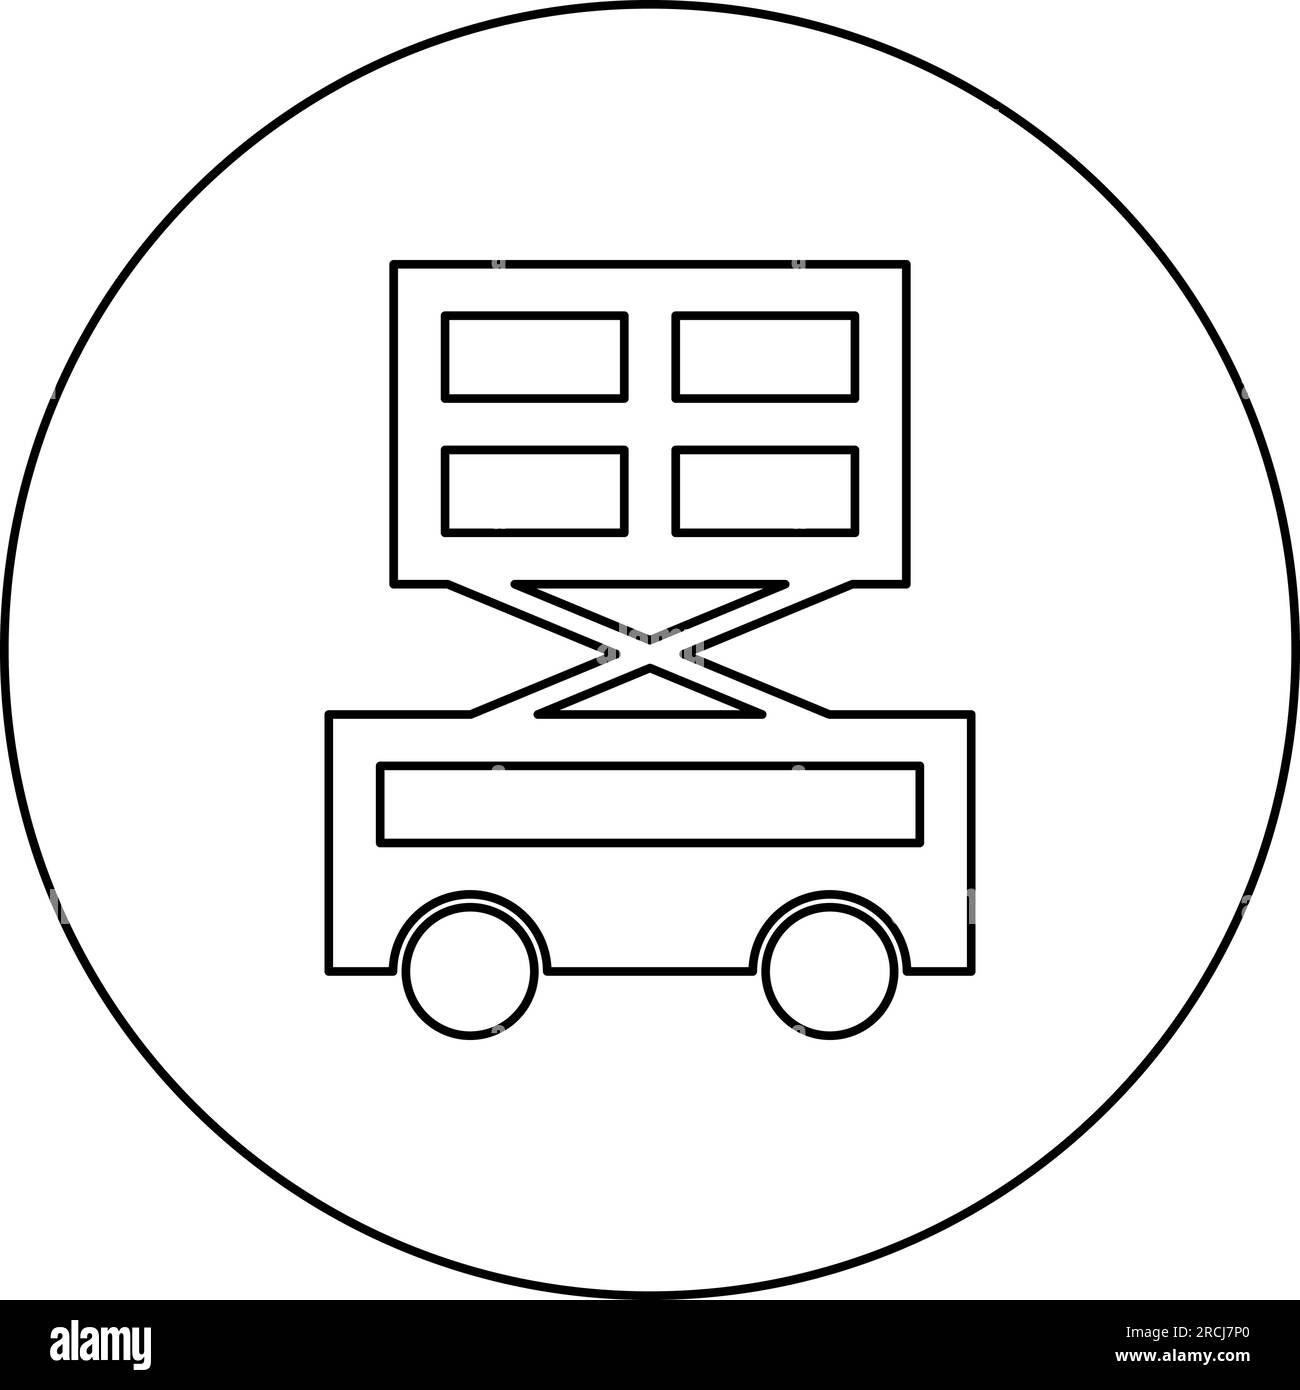 Lifting machine scissor lift platform self propelled icon in circle round black color vector illustration image outline contour line thin style simple Stock Vector